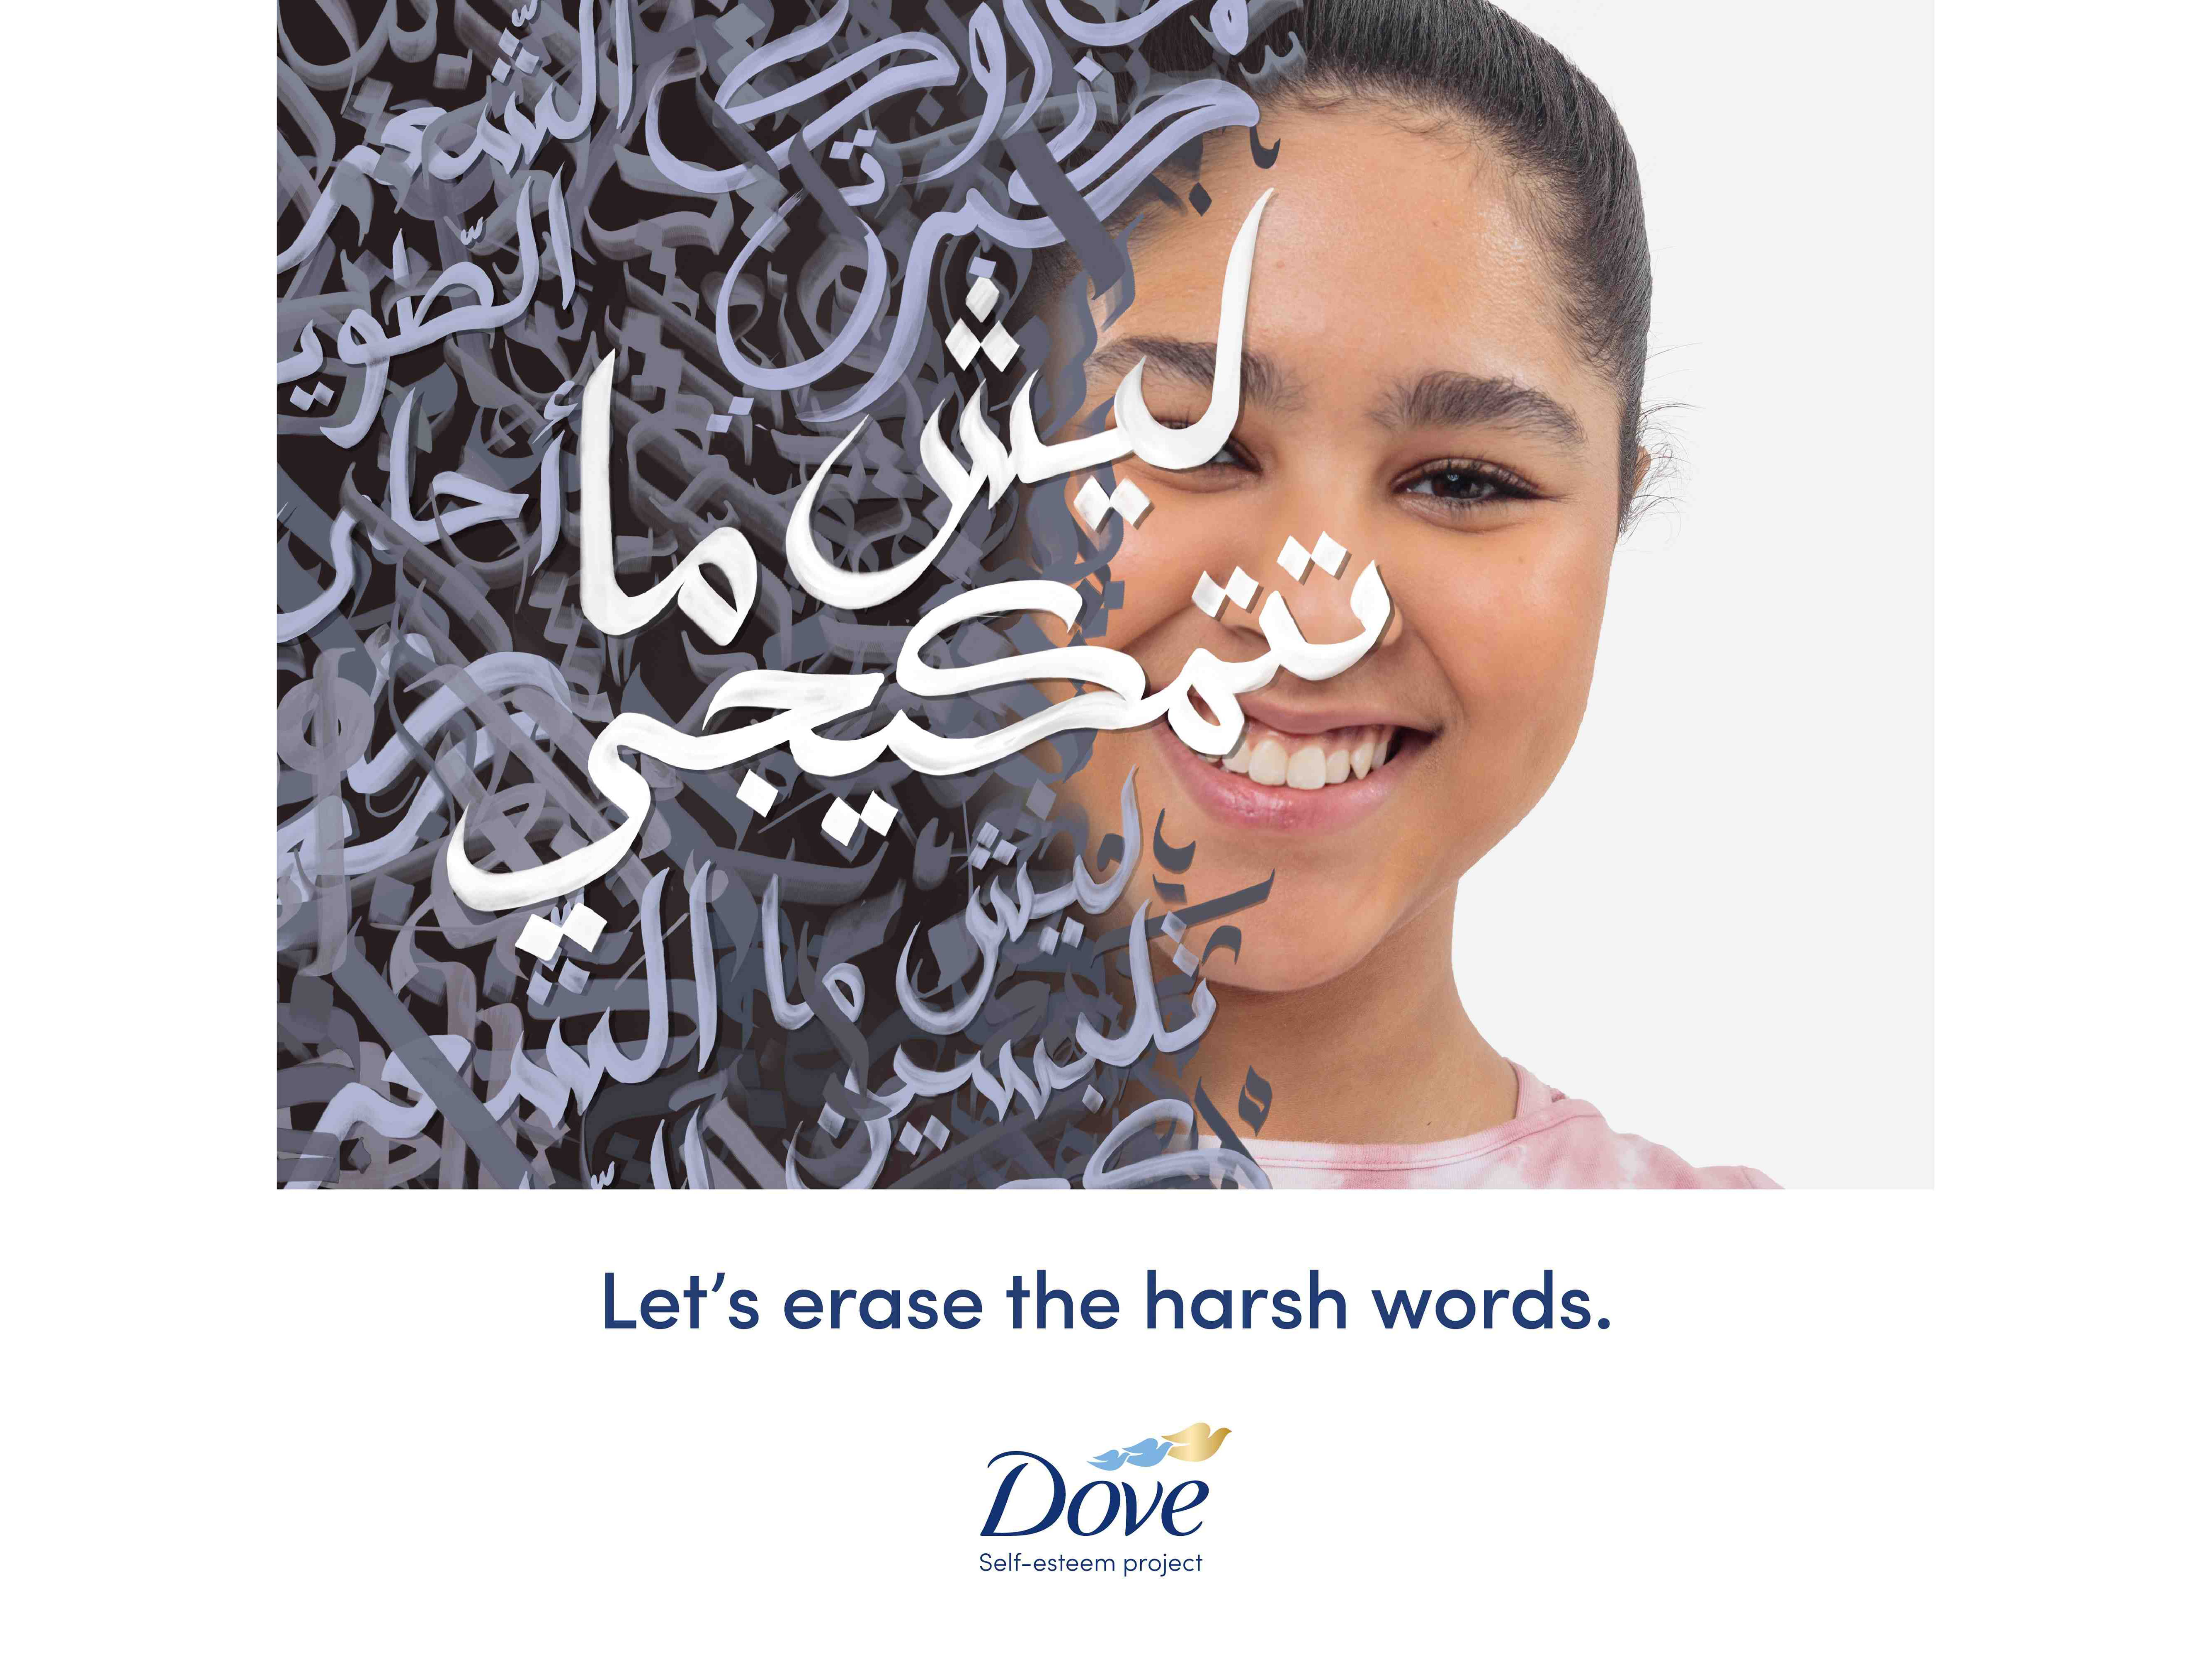 Memac Ogilvy and Dove launch an empowering campaign that carries the beauty brand’s Self Esteem Project 